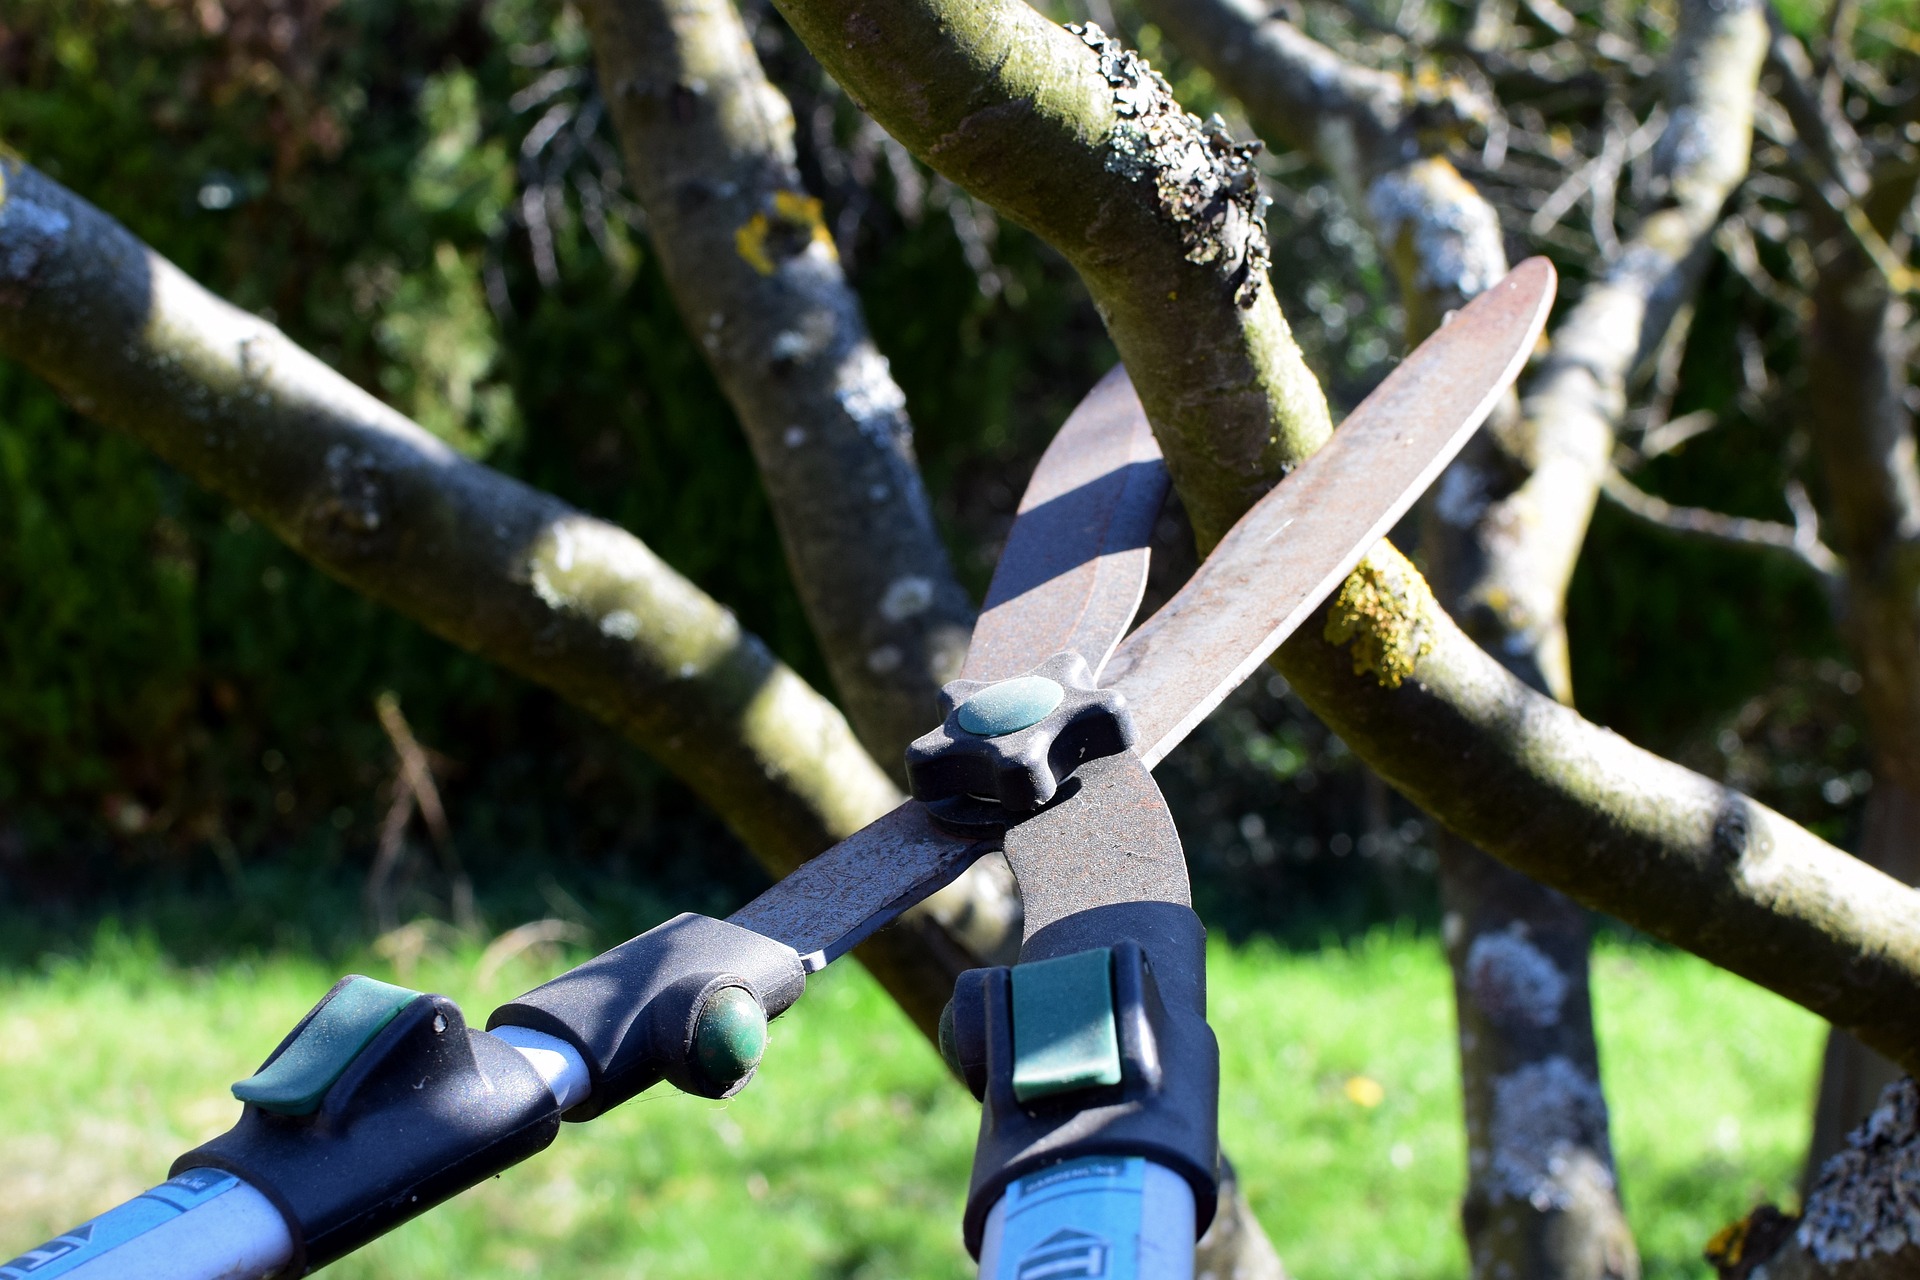 Crucial tree care tips for property owners include proper seasonal pruning